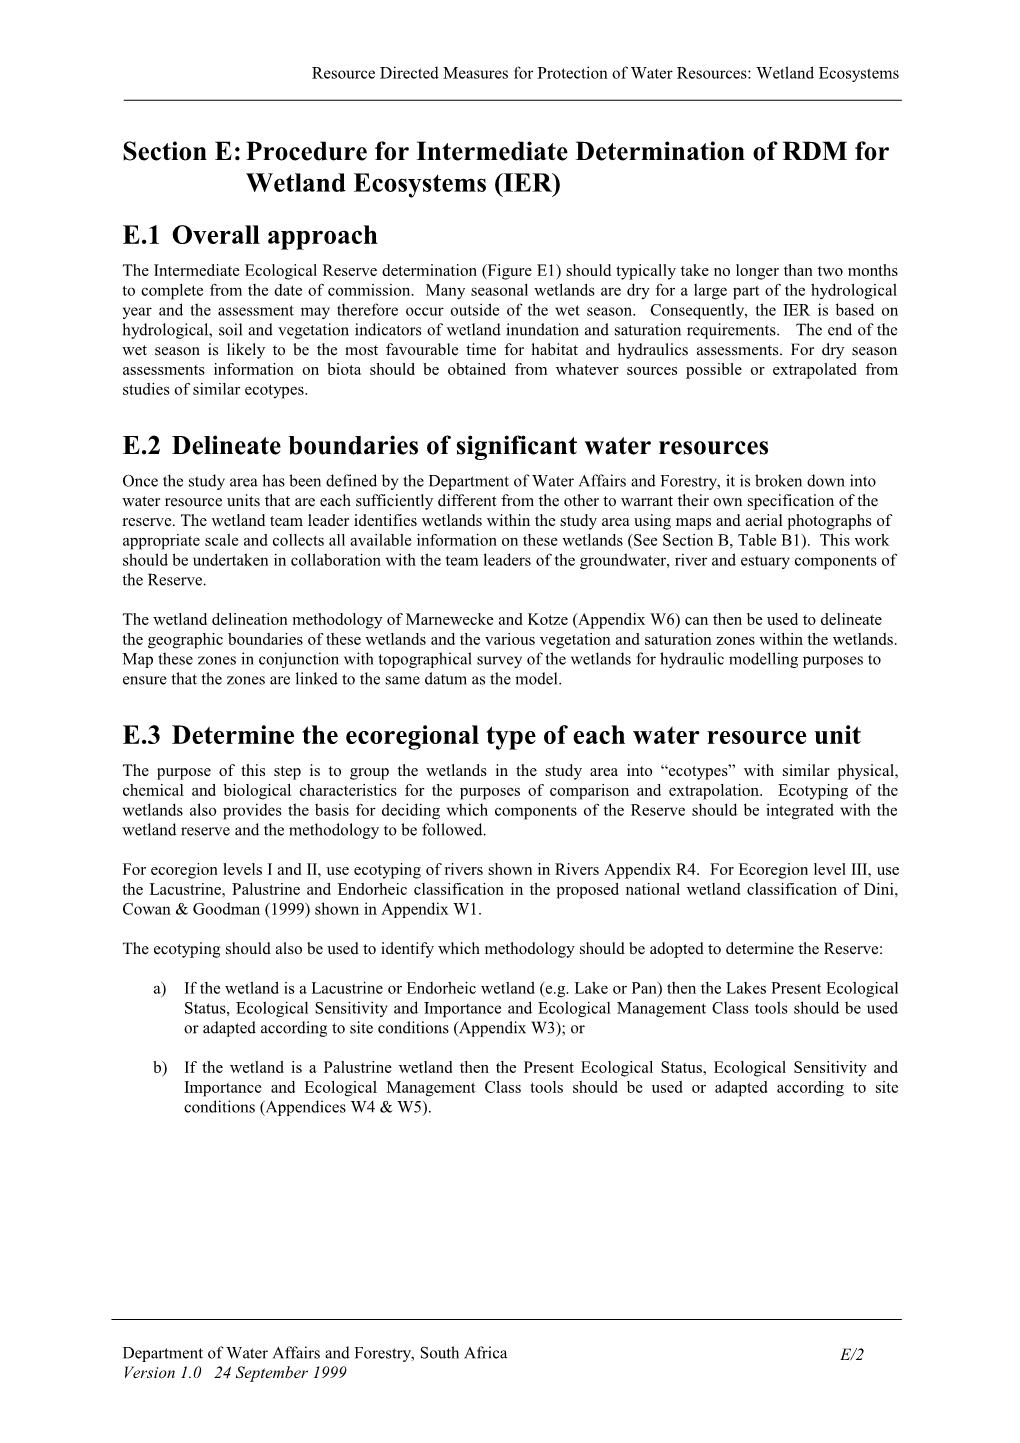 Section E: Procedure for Intermediate Determination of Rdm for Wetland Ecosystems